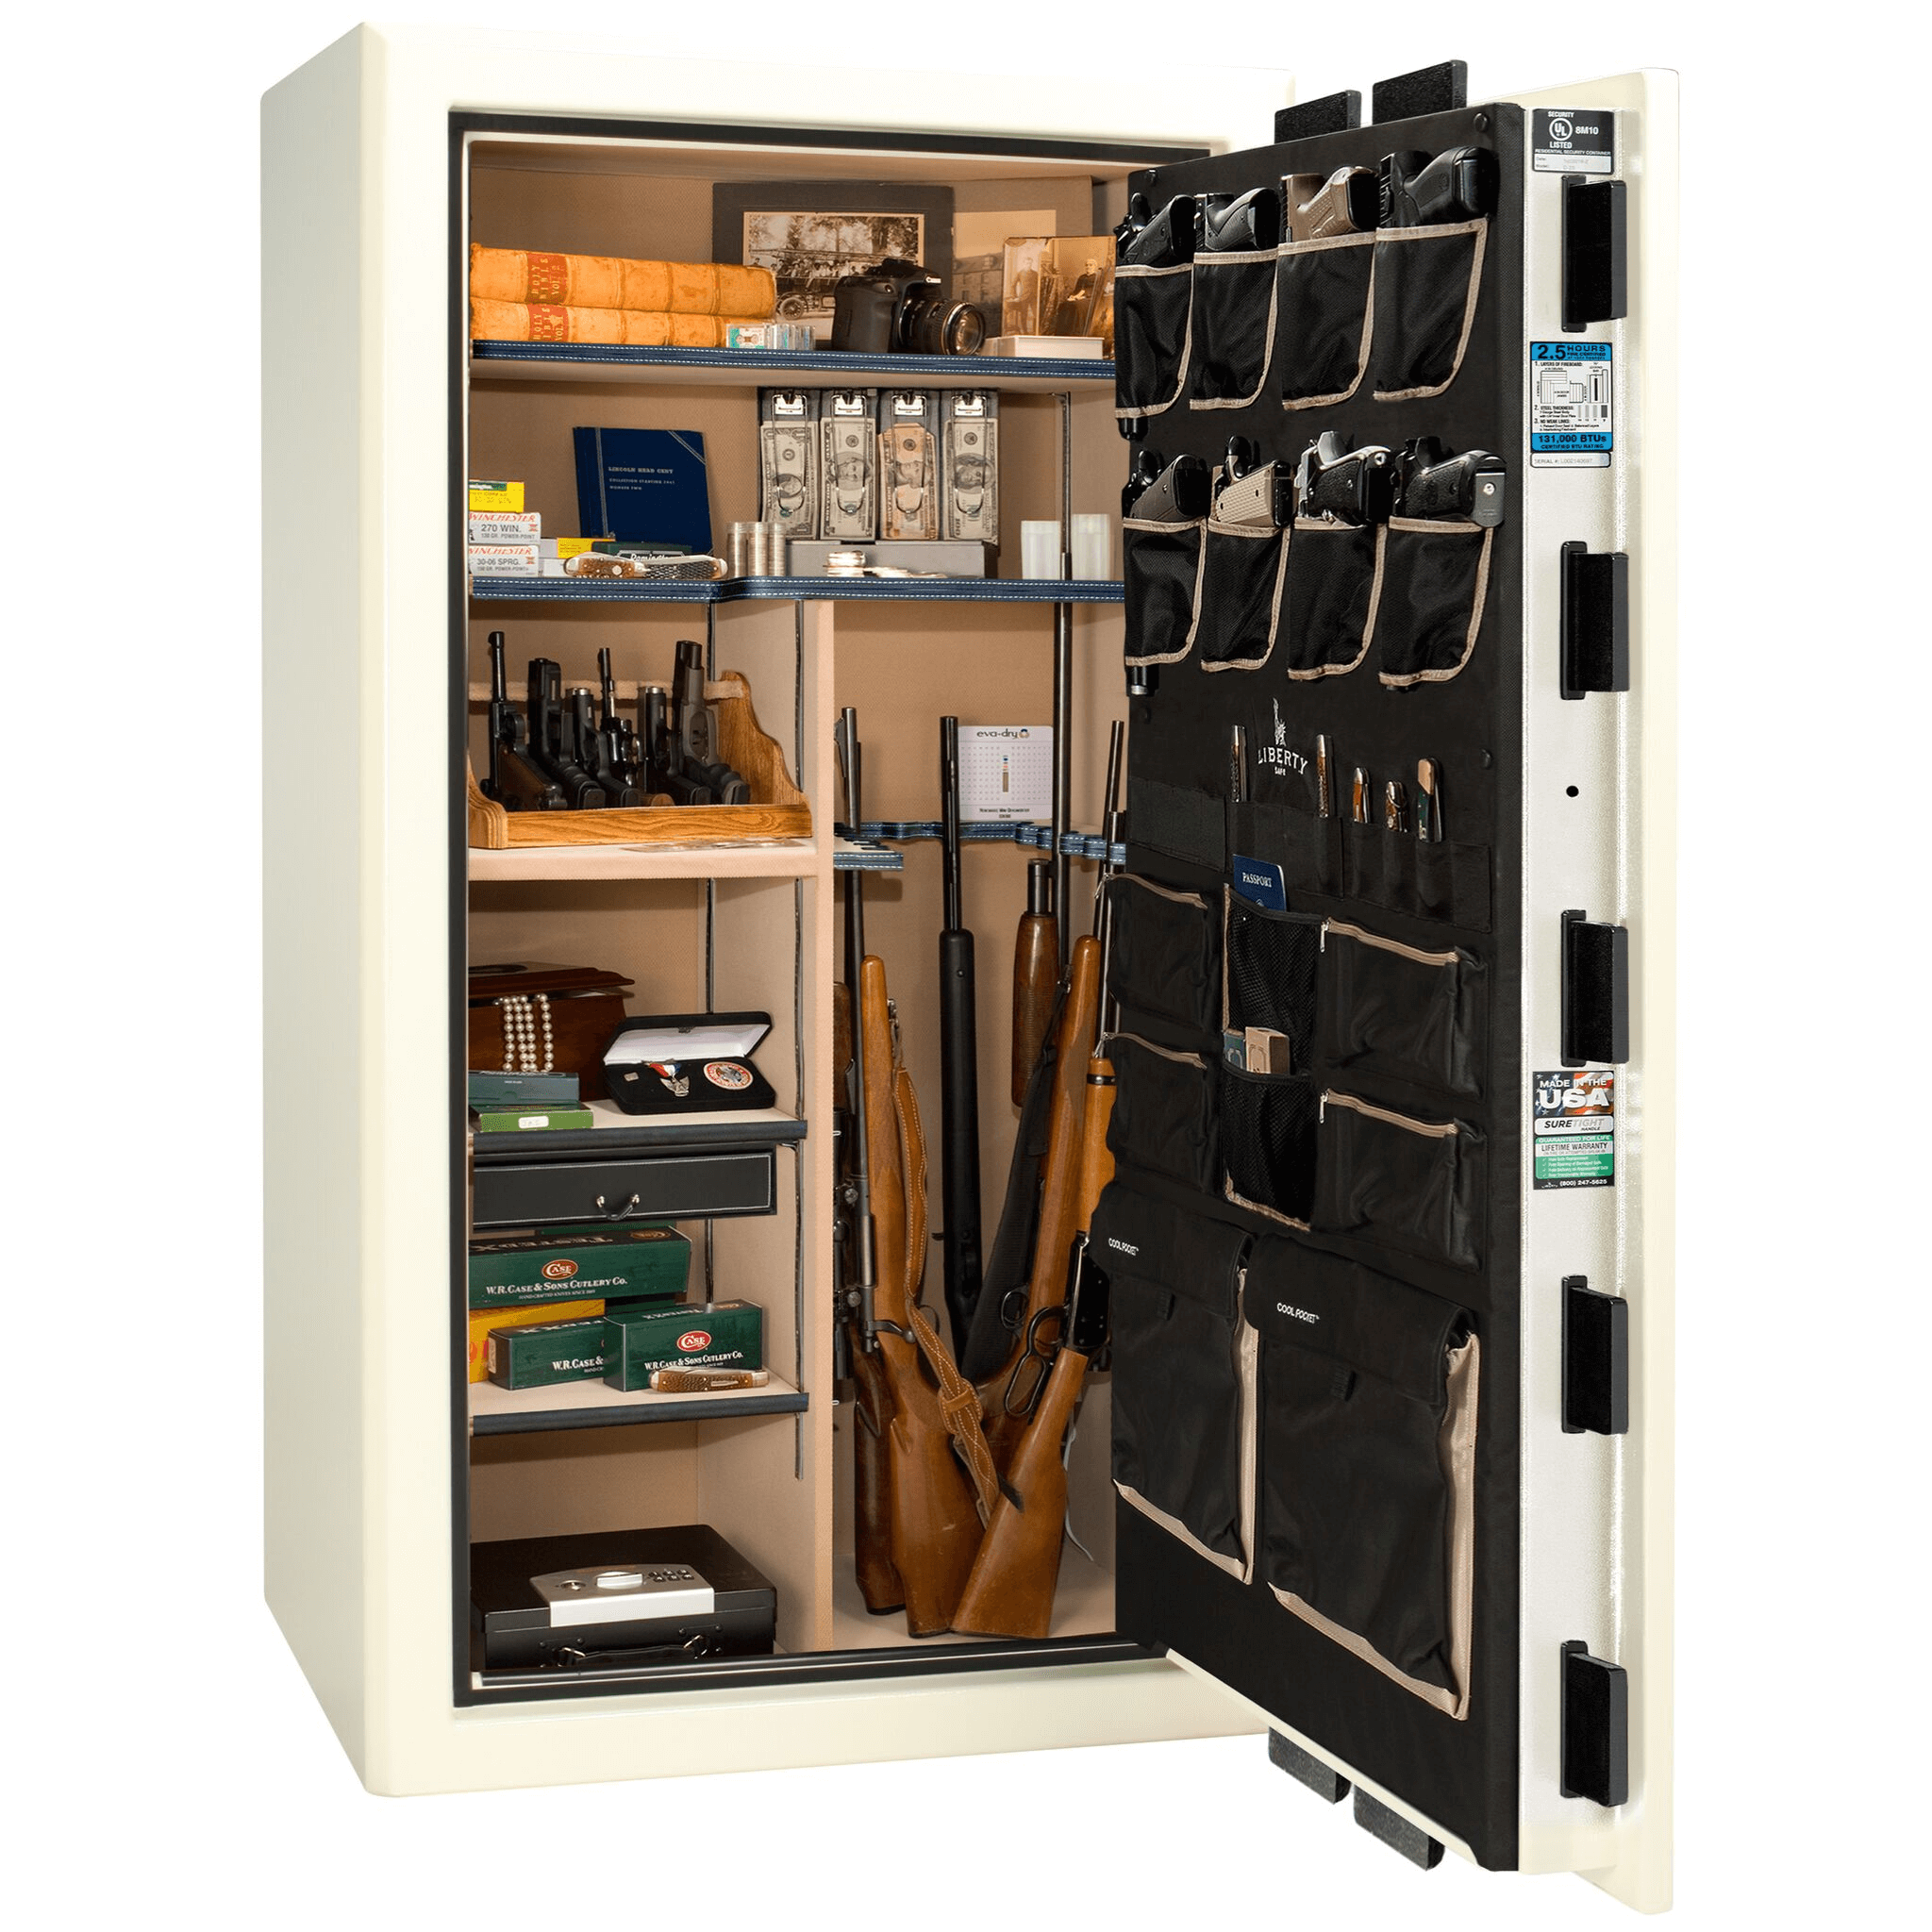 Presidential Series | Level 8 Security | 2.5 Hours Fire Protection | 40 | Dimensions: 66.5"(H) x 36.25"(W) x 32"(D) | White Marble | Black Chrome Hardware | Electronic Lock